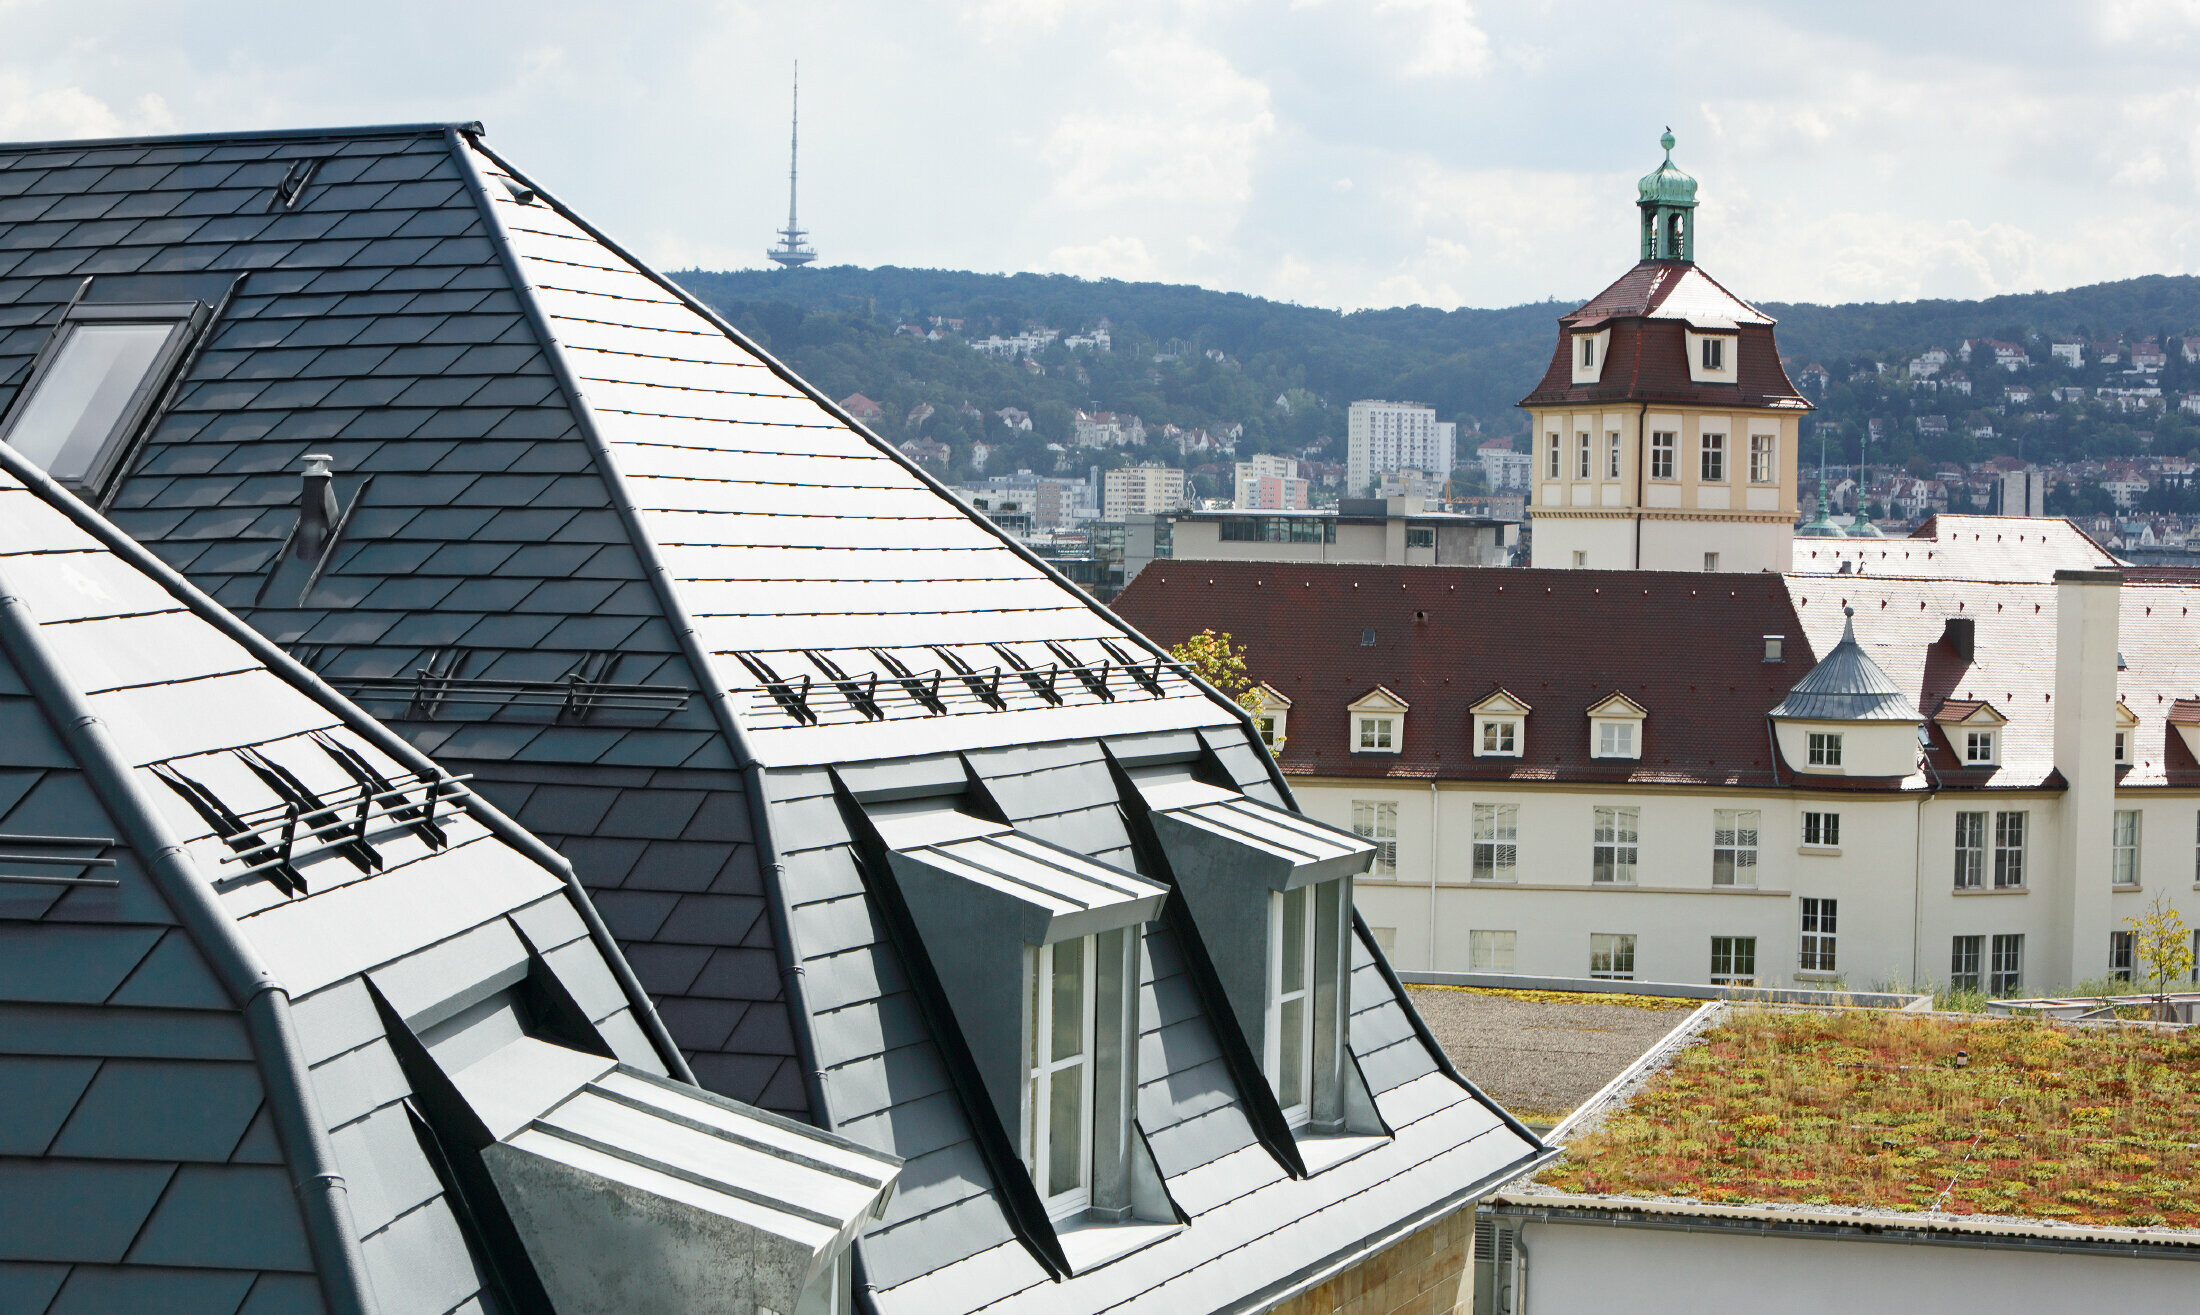 Old town house in Stuttgart with pitched roof and many dormer windows, roofed with PREFA aluminium shingle in P.10 anthracite